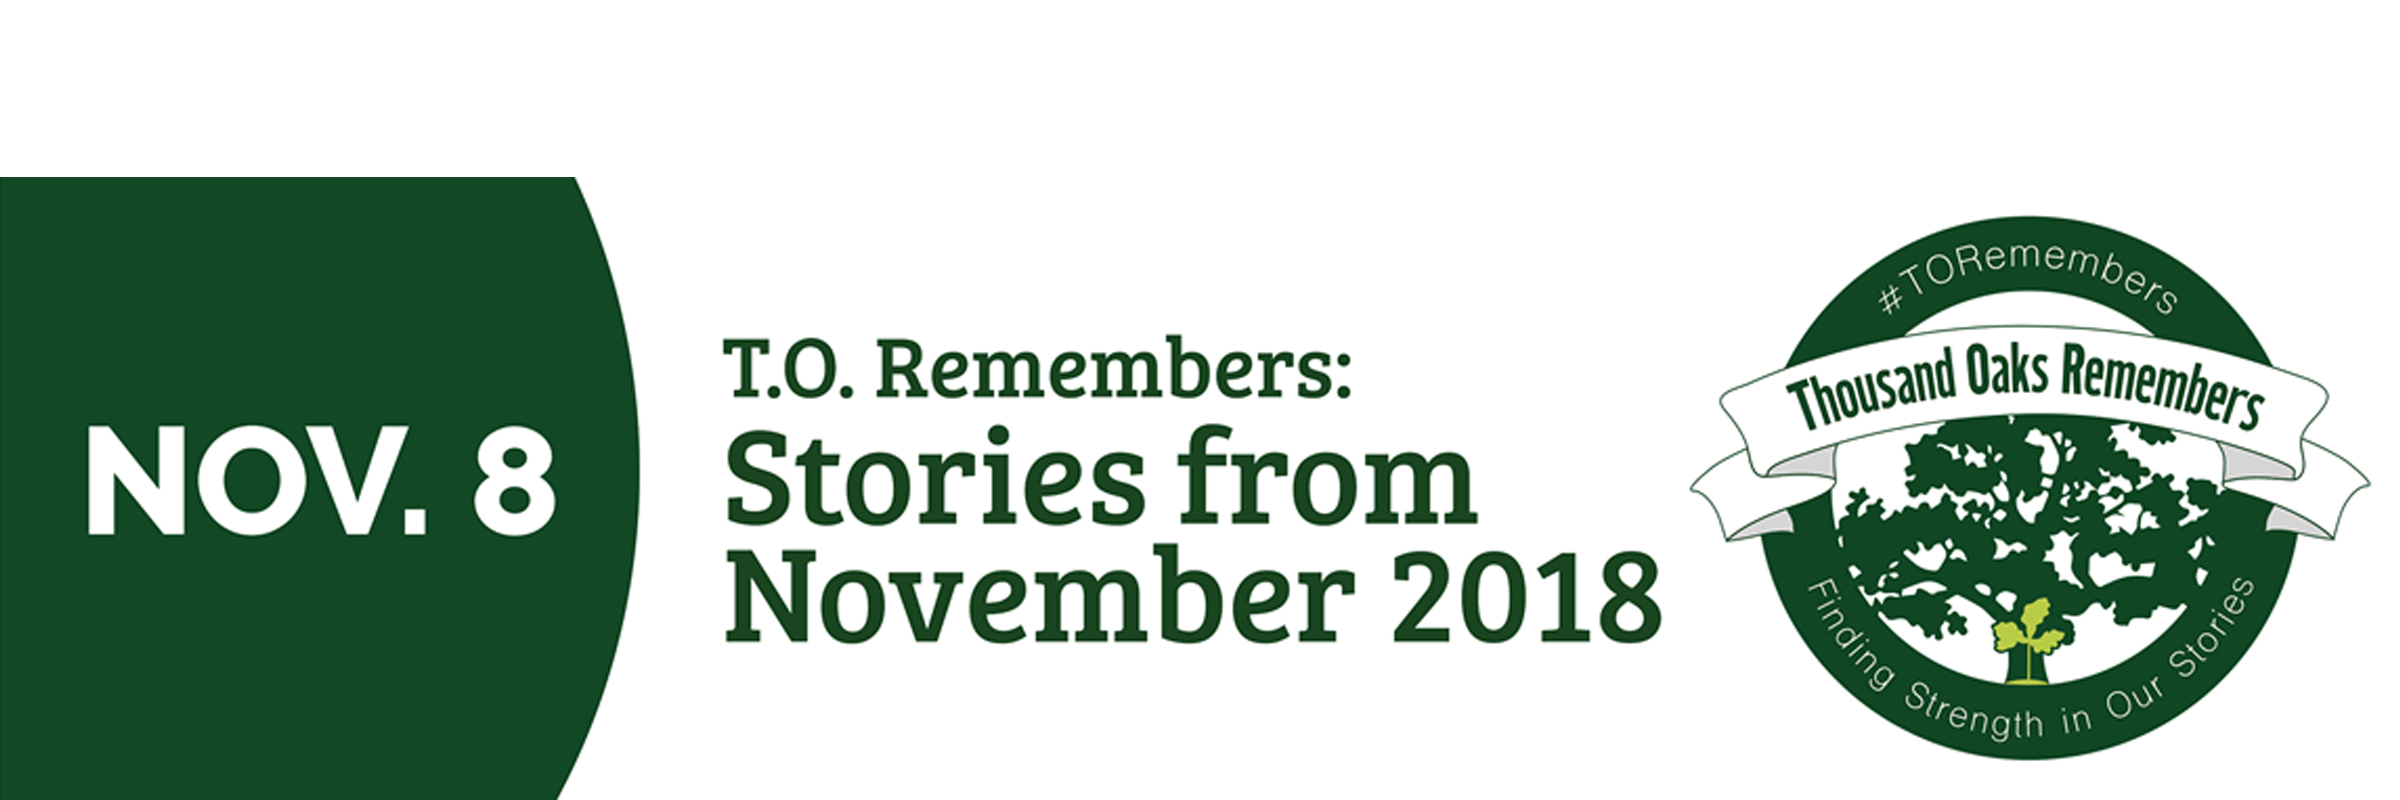 T.O. Remembers - Stories from November 2018